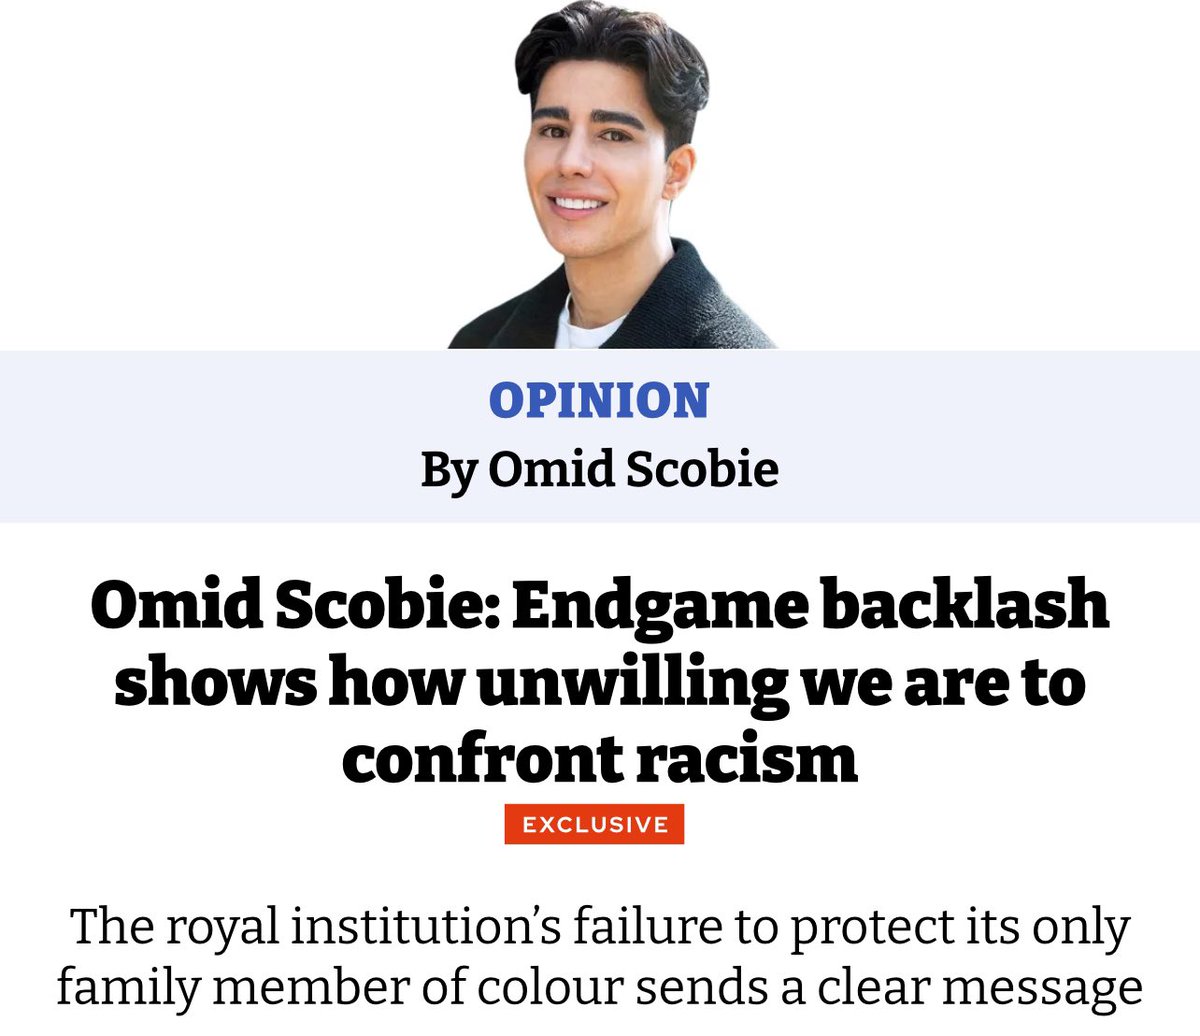 How absurd is it when a brown dude who wants to be white lectures us on confronting racism    #omidlickspittle #OmidScobieIsAPetPoodle #endgame #Omid #scobie #OmidScobie #OmidScobieisaLiar